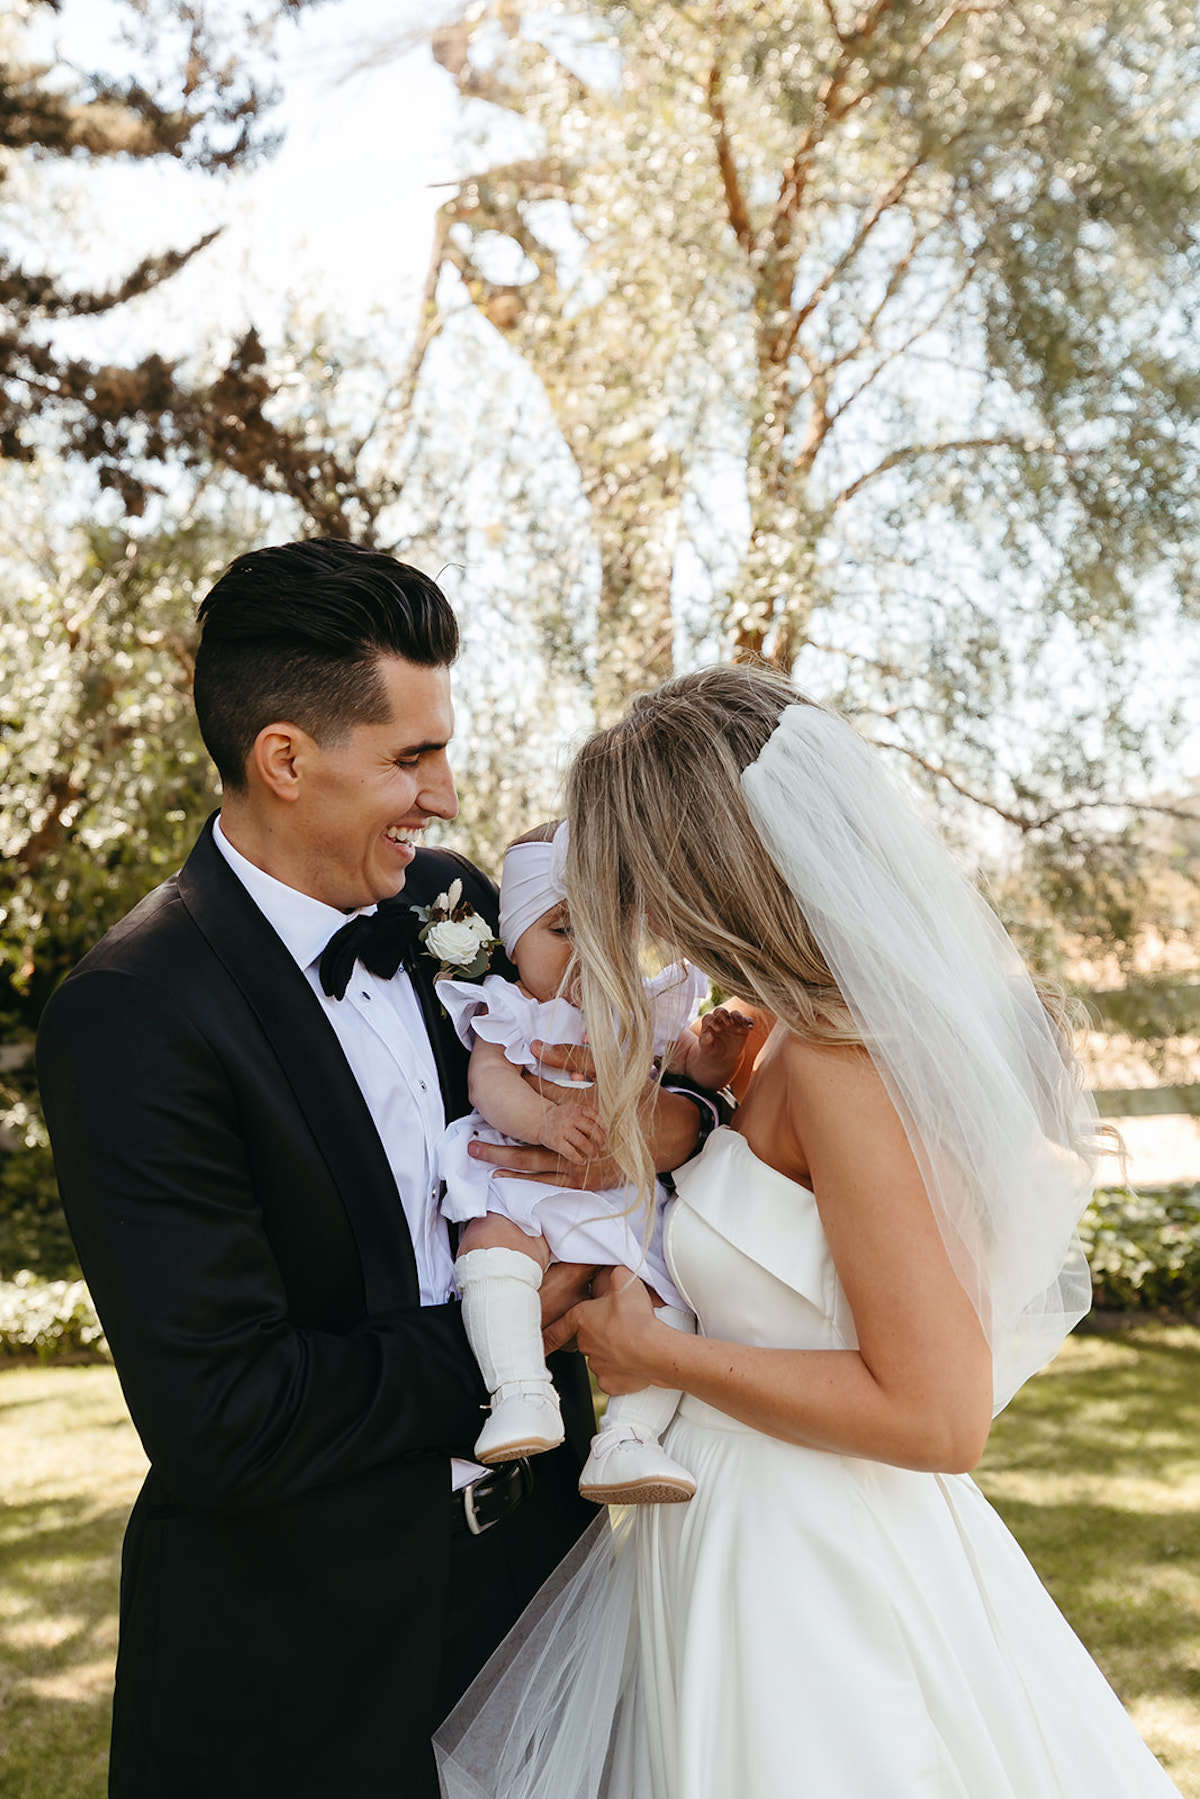 How to get the best wedding portraits with your baby